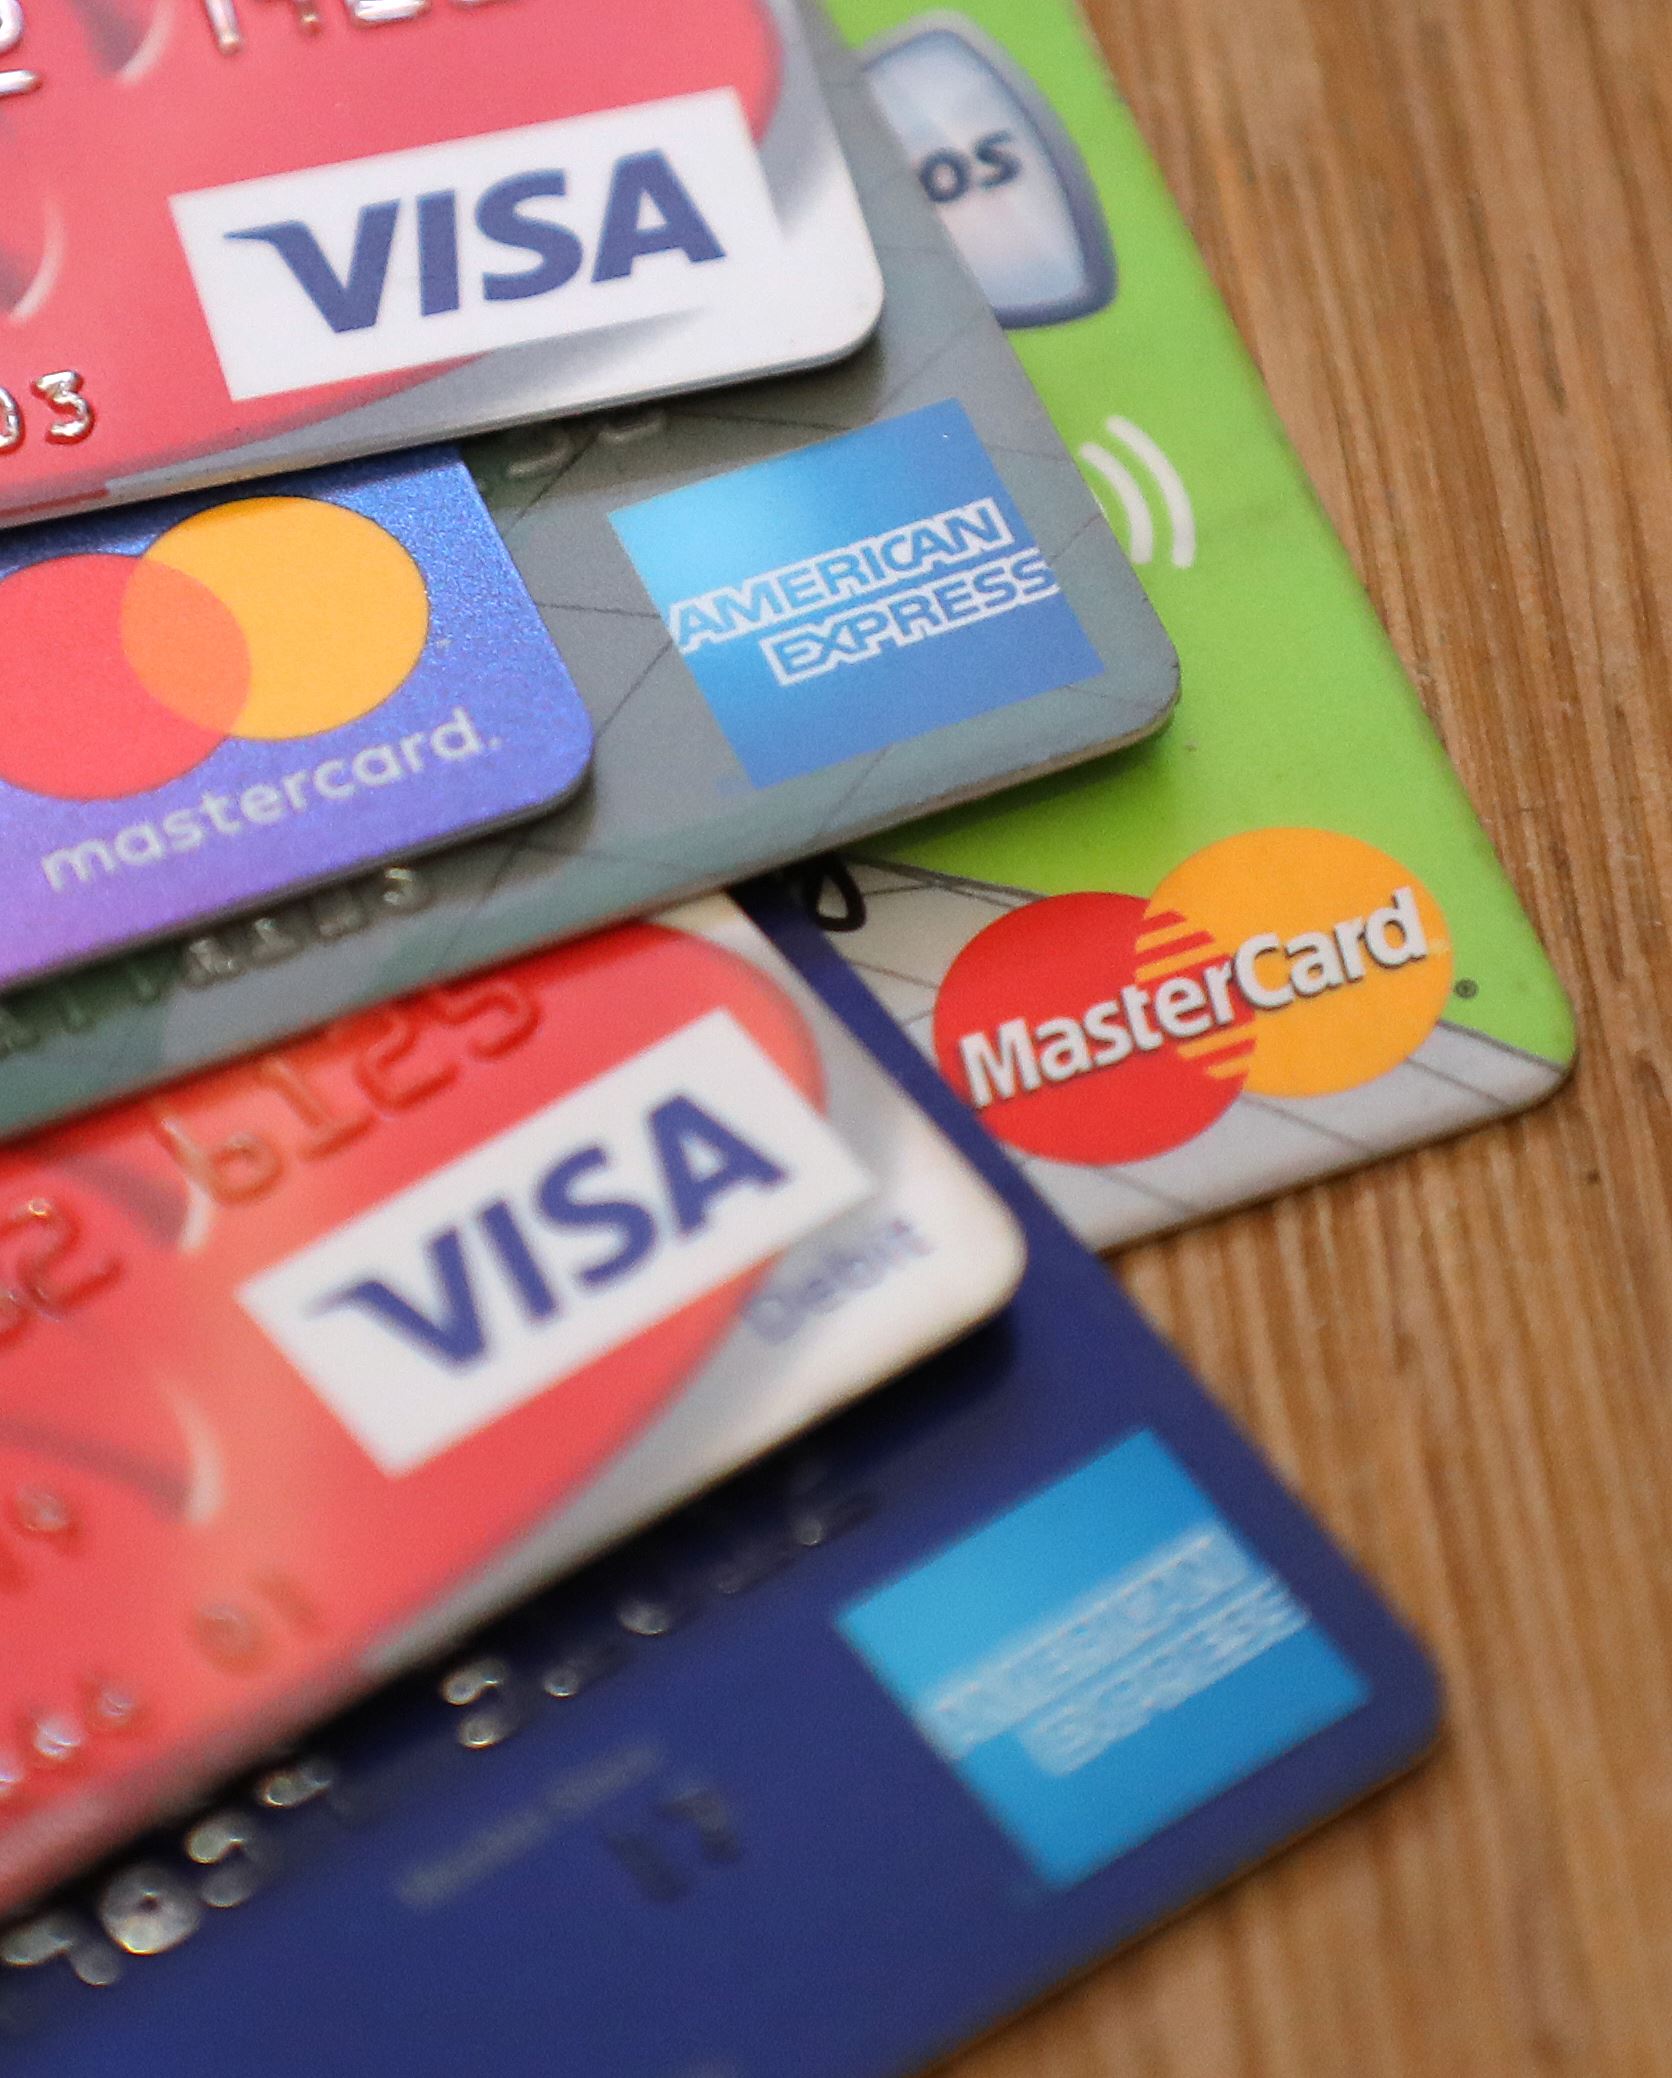 Zerointerest periods offered on credit cards expected to increase